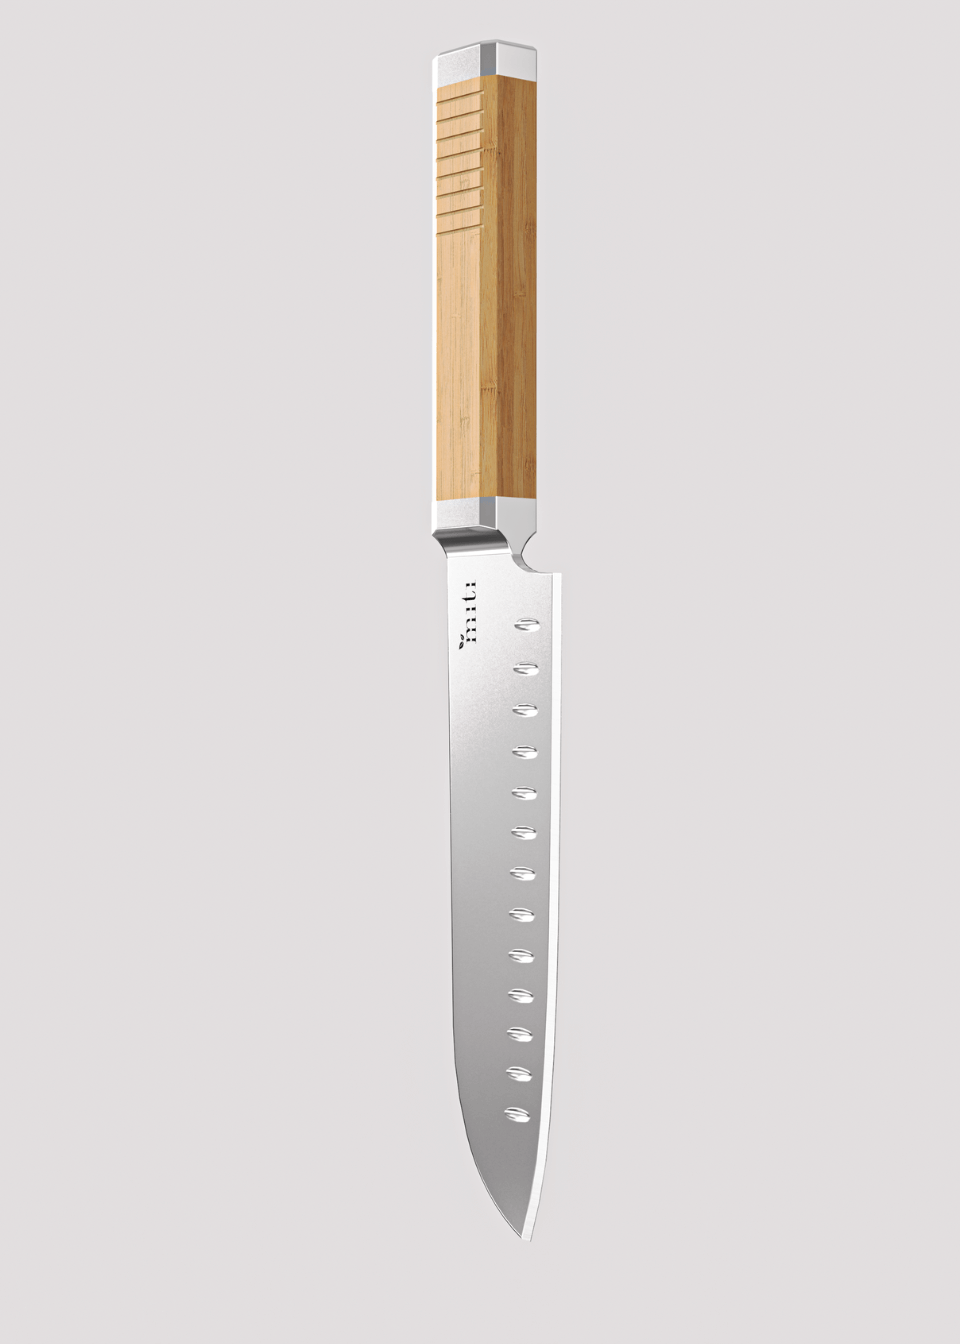 Artistic bamboo kitchen knife by MITI Life in white background